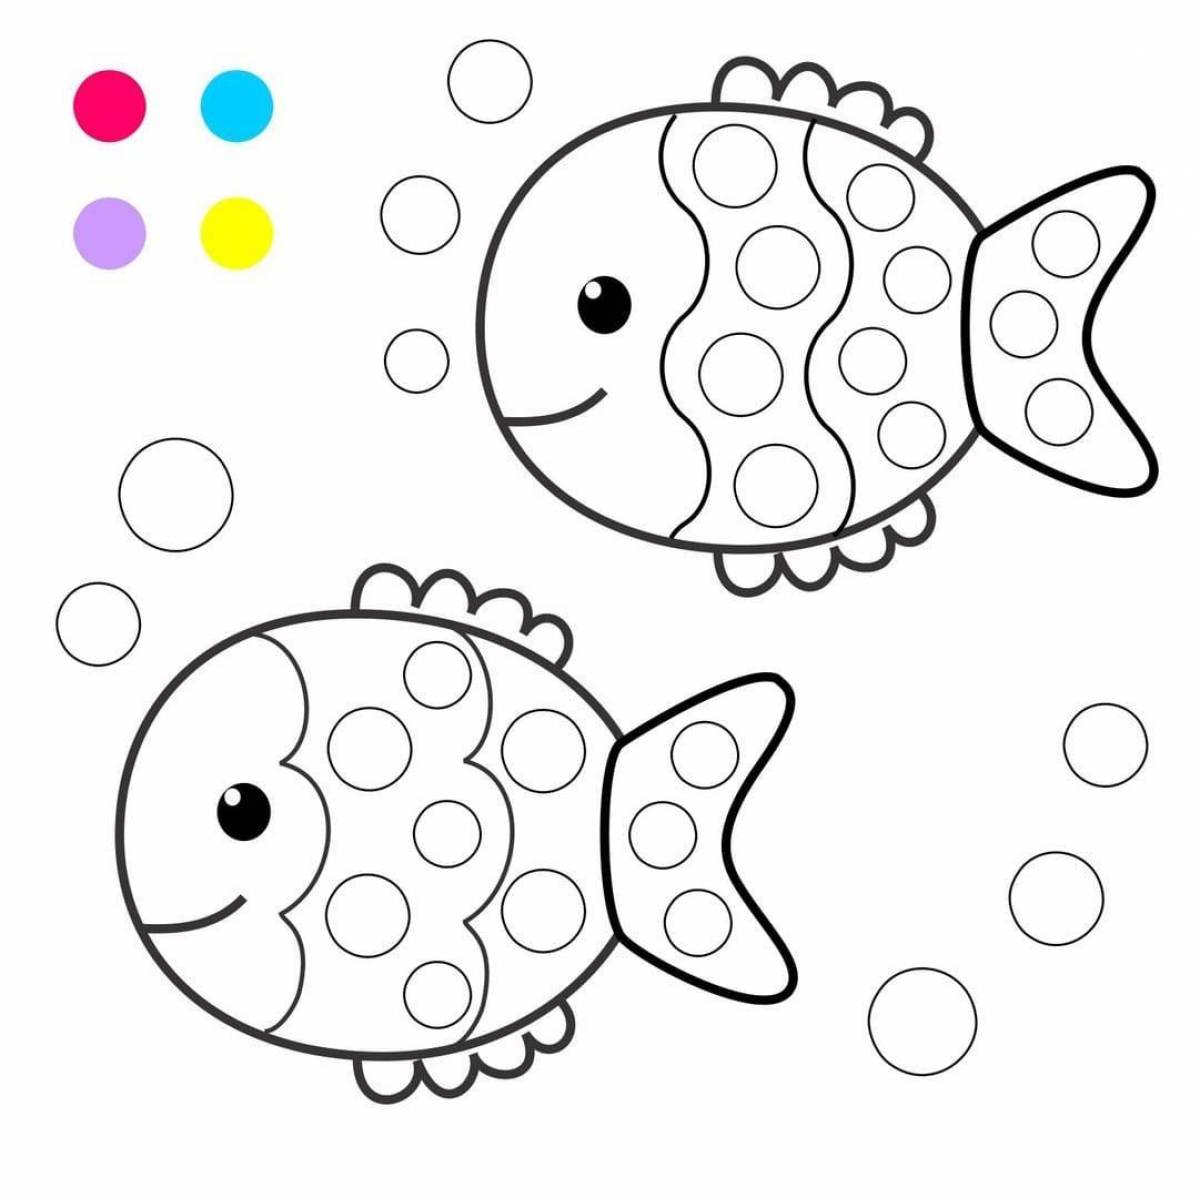 Color funny finger coloring page